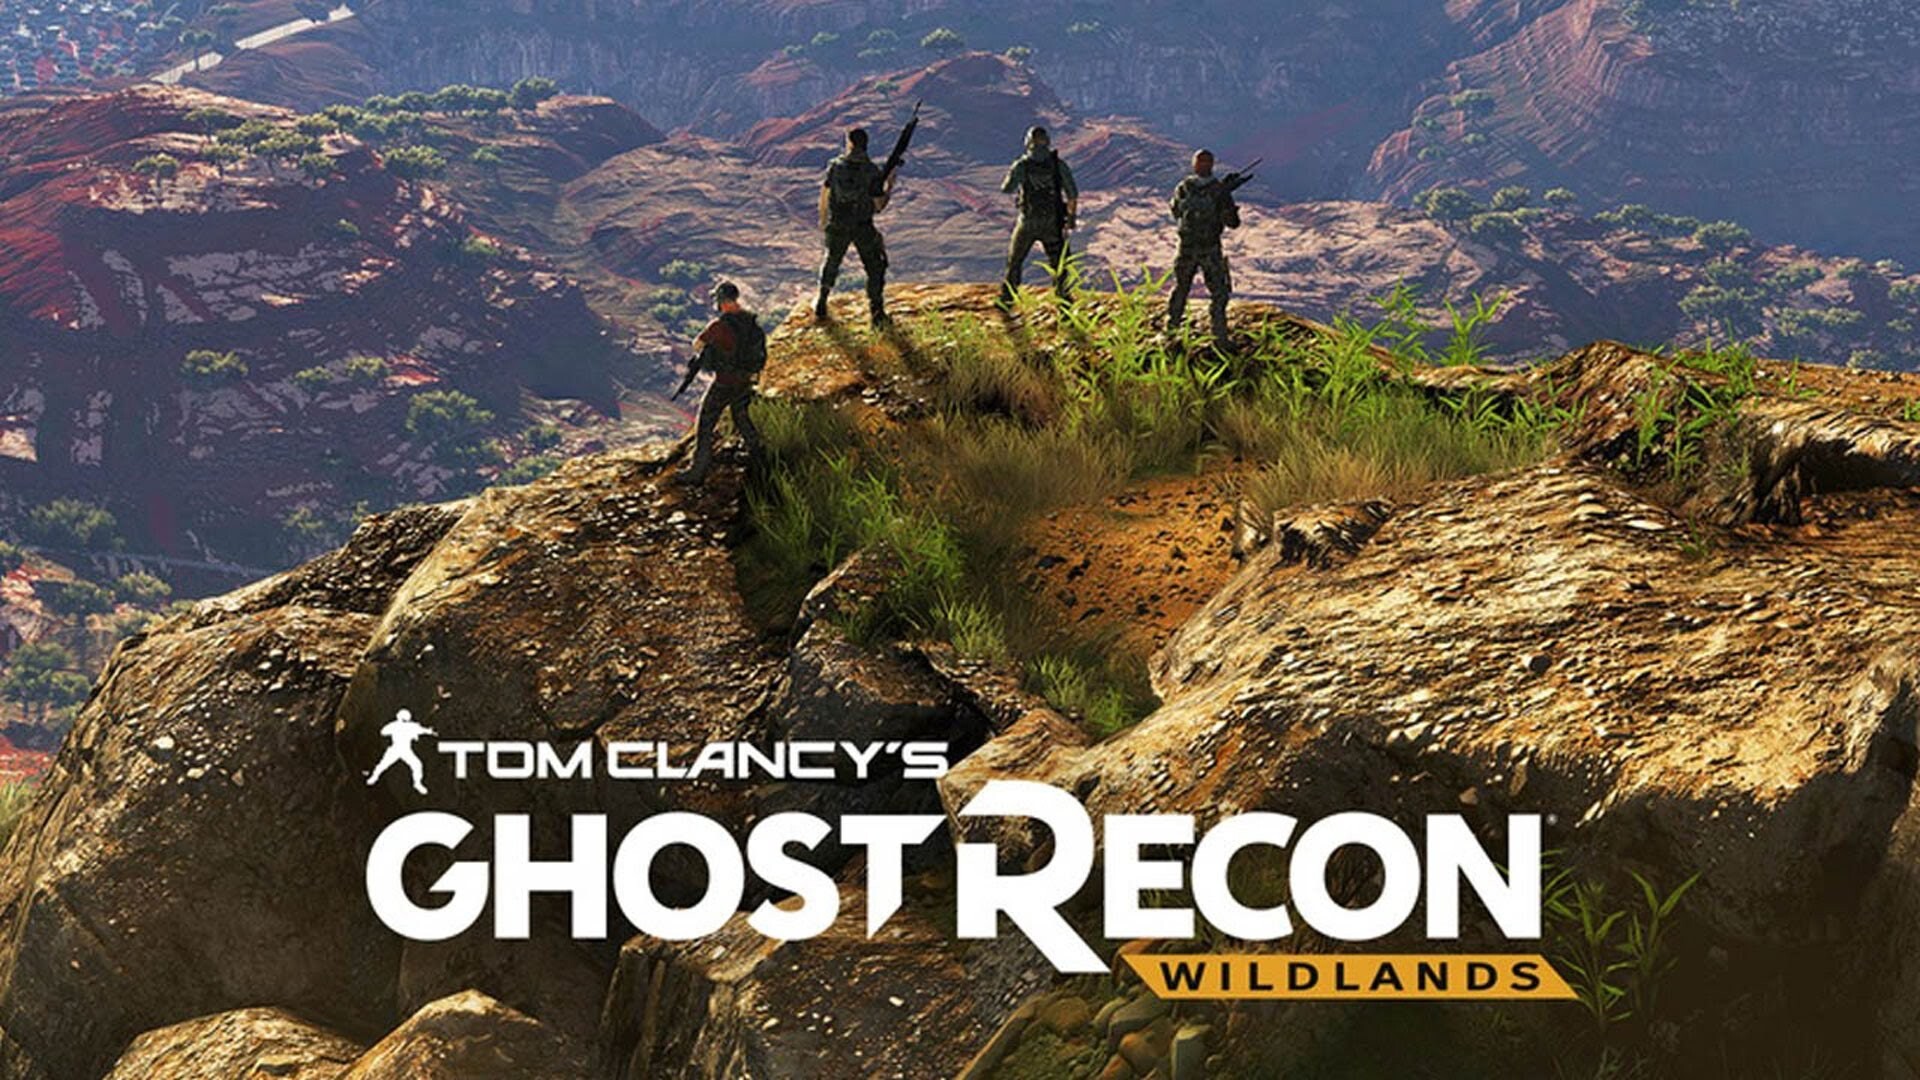 Ghost Recon: Wildlands: A tactical cover based shooter game set in an open world environment, Tom Clancy, Ubisoft. 1920x1080 Full HD Wallpaper.